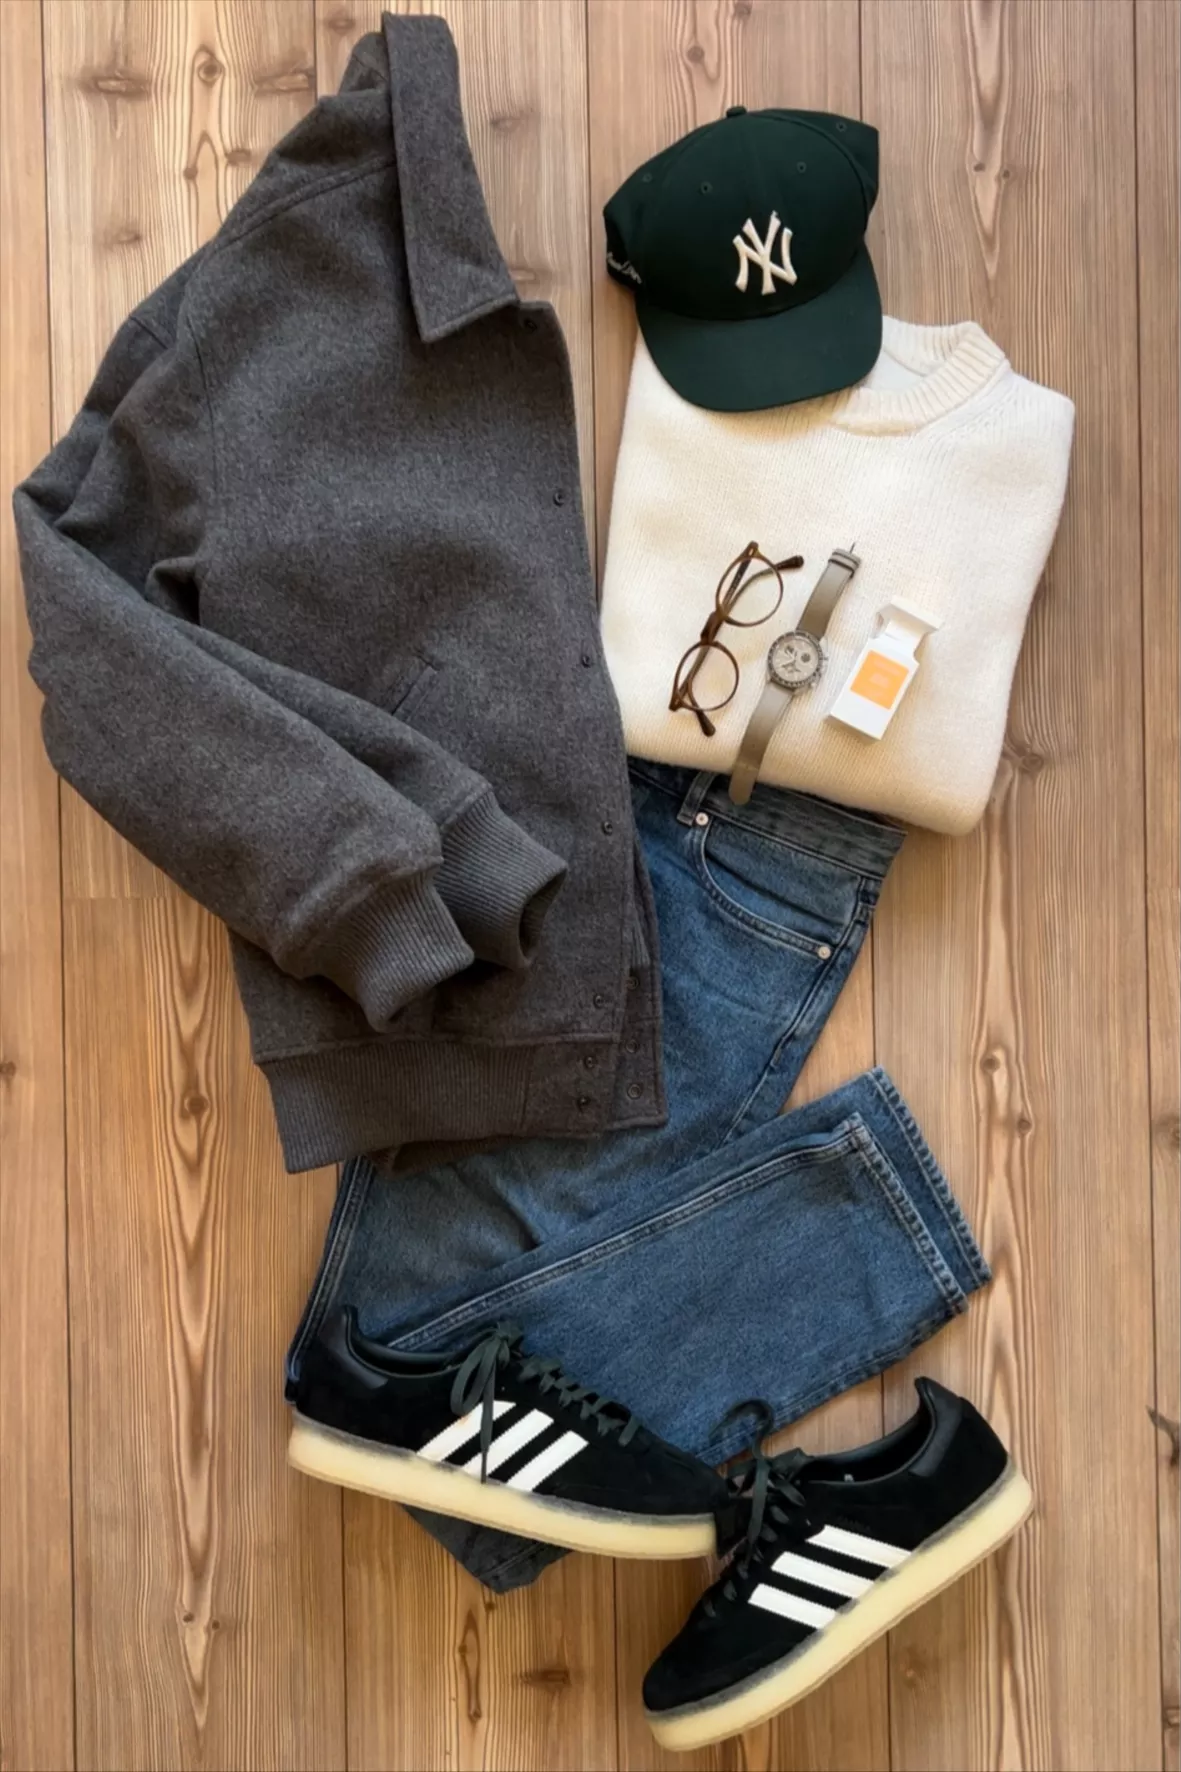 Men's Outfit Ideas for Winter